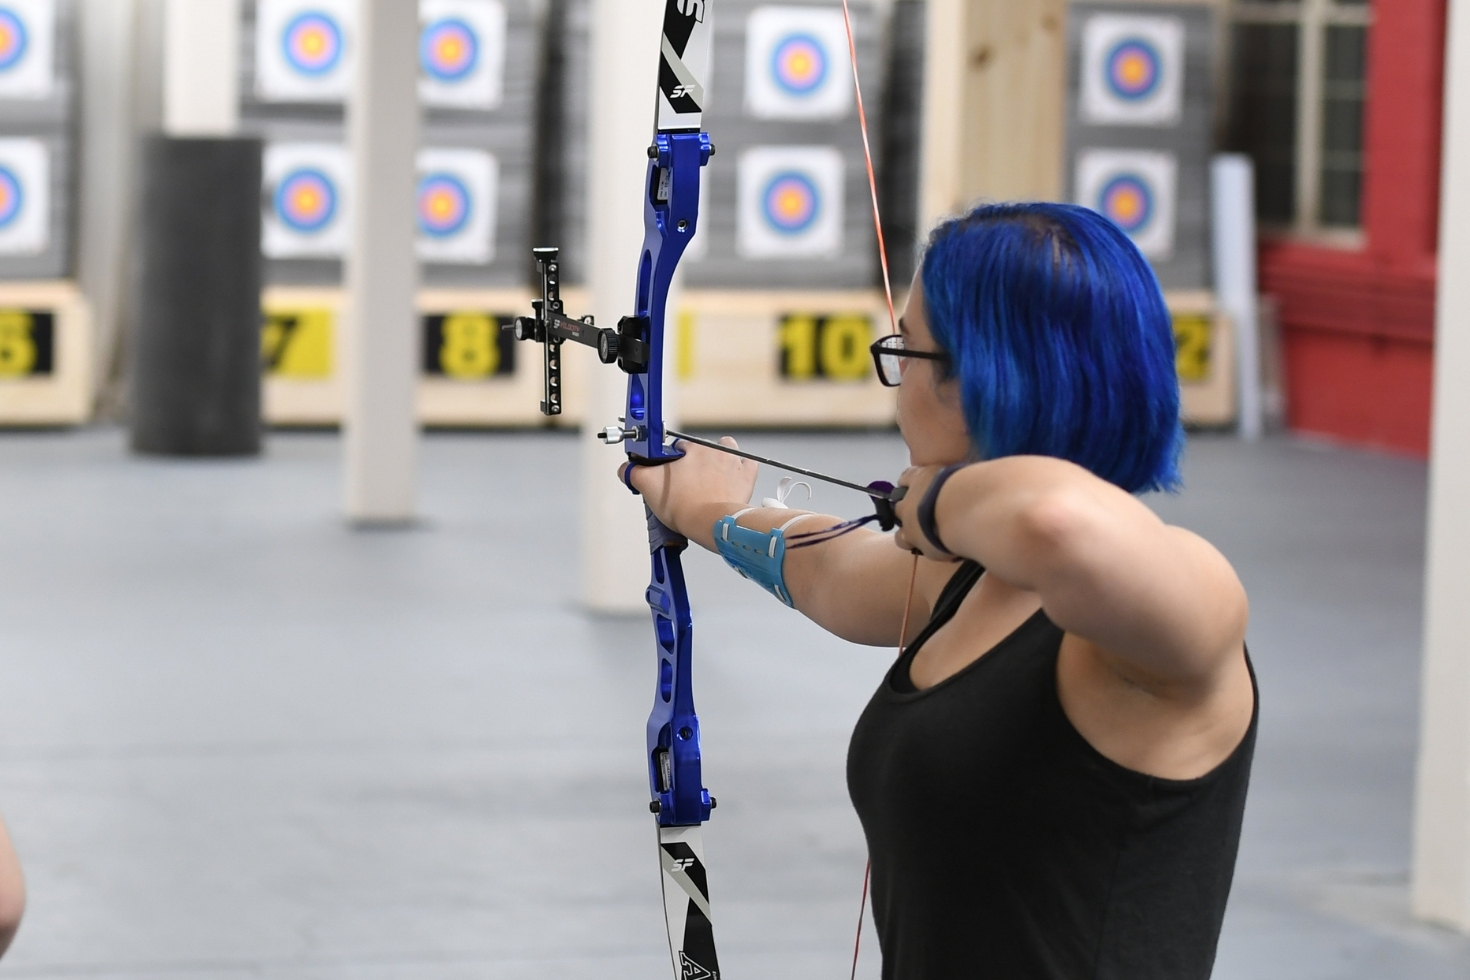 Woman with blue hair holding a bow and arrow